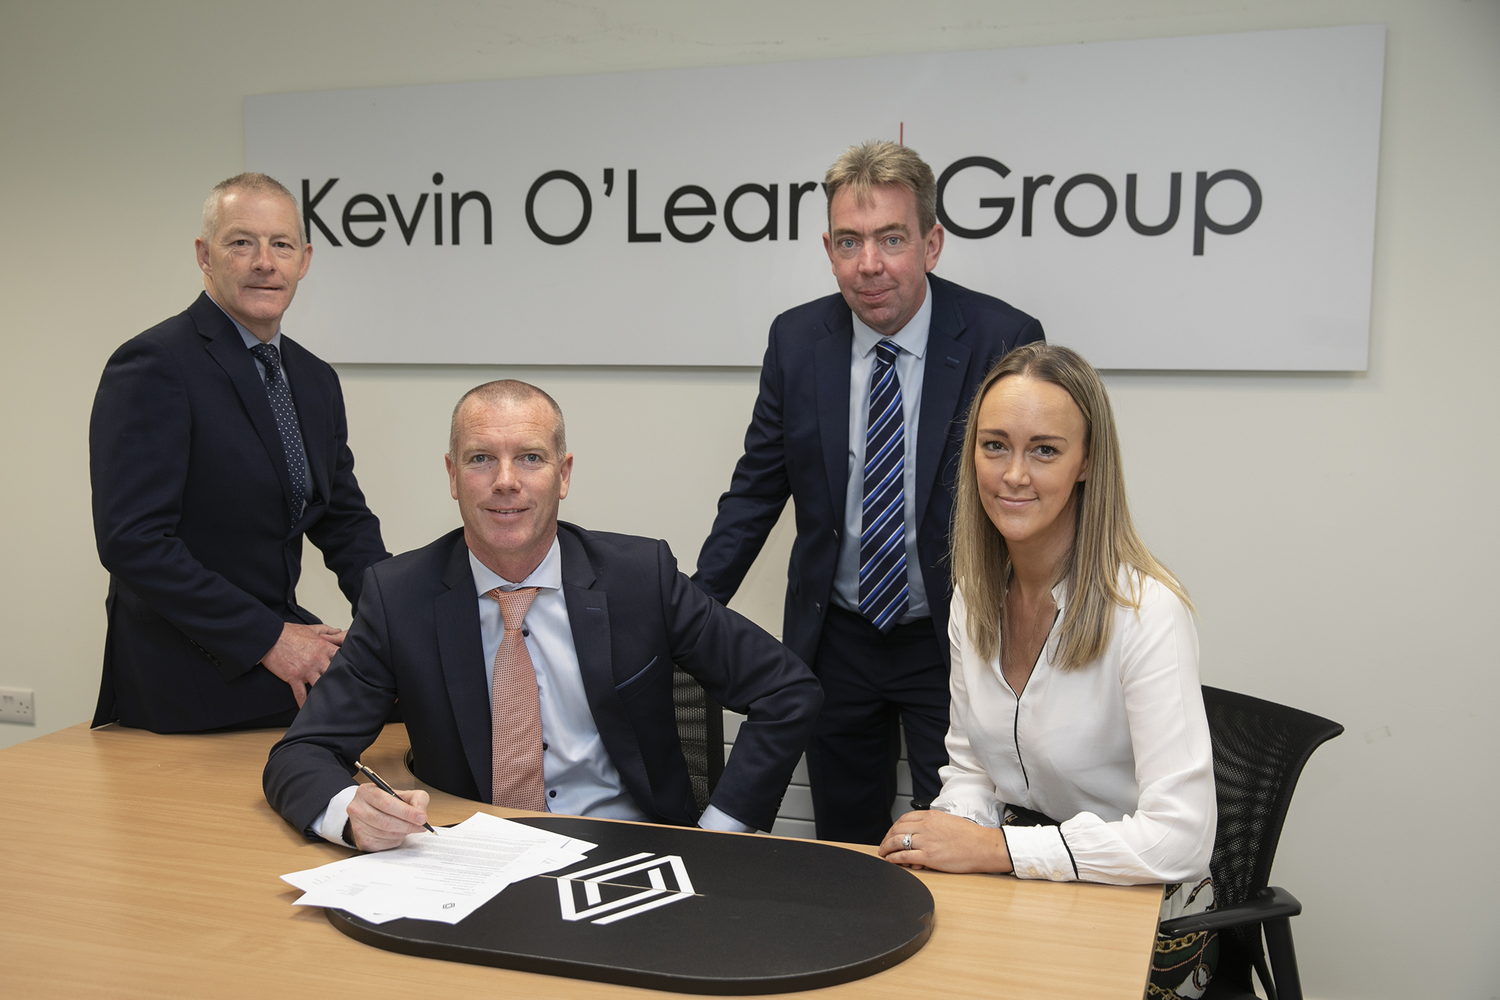 Car Industry News | Kevin O'Leary gets Renault franchise for South Tipp | CompleteCar.ie